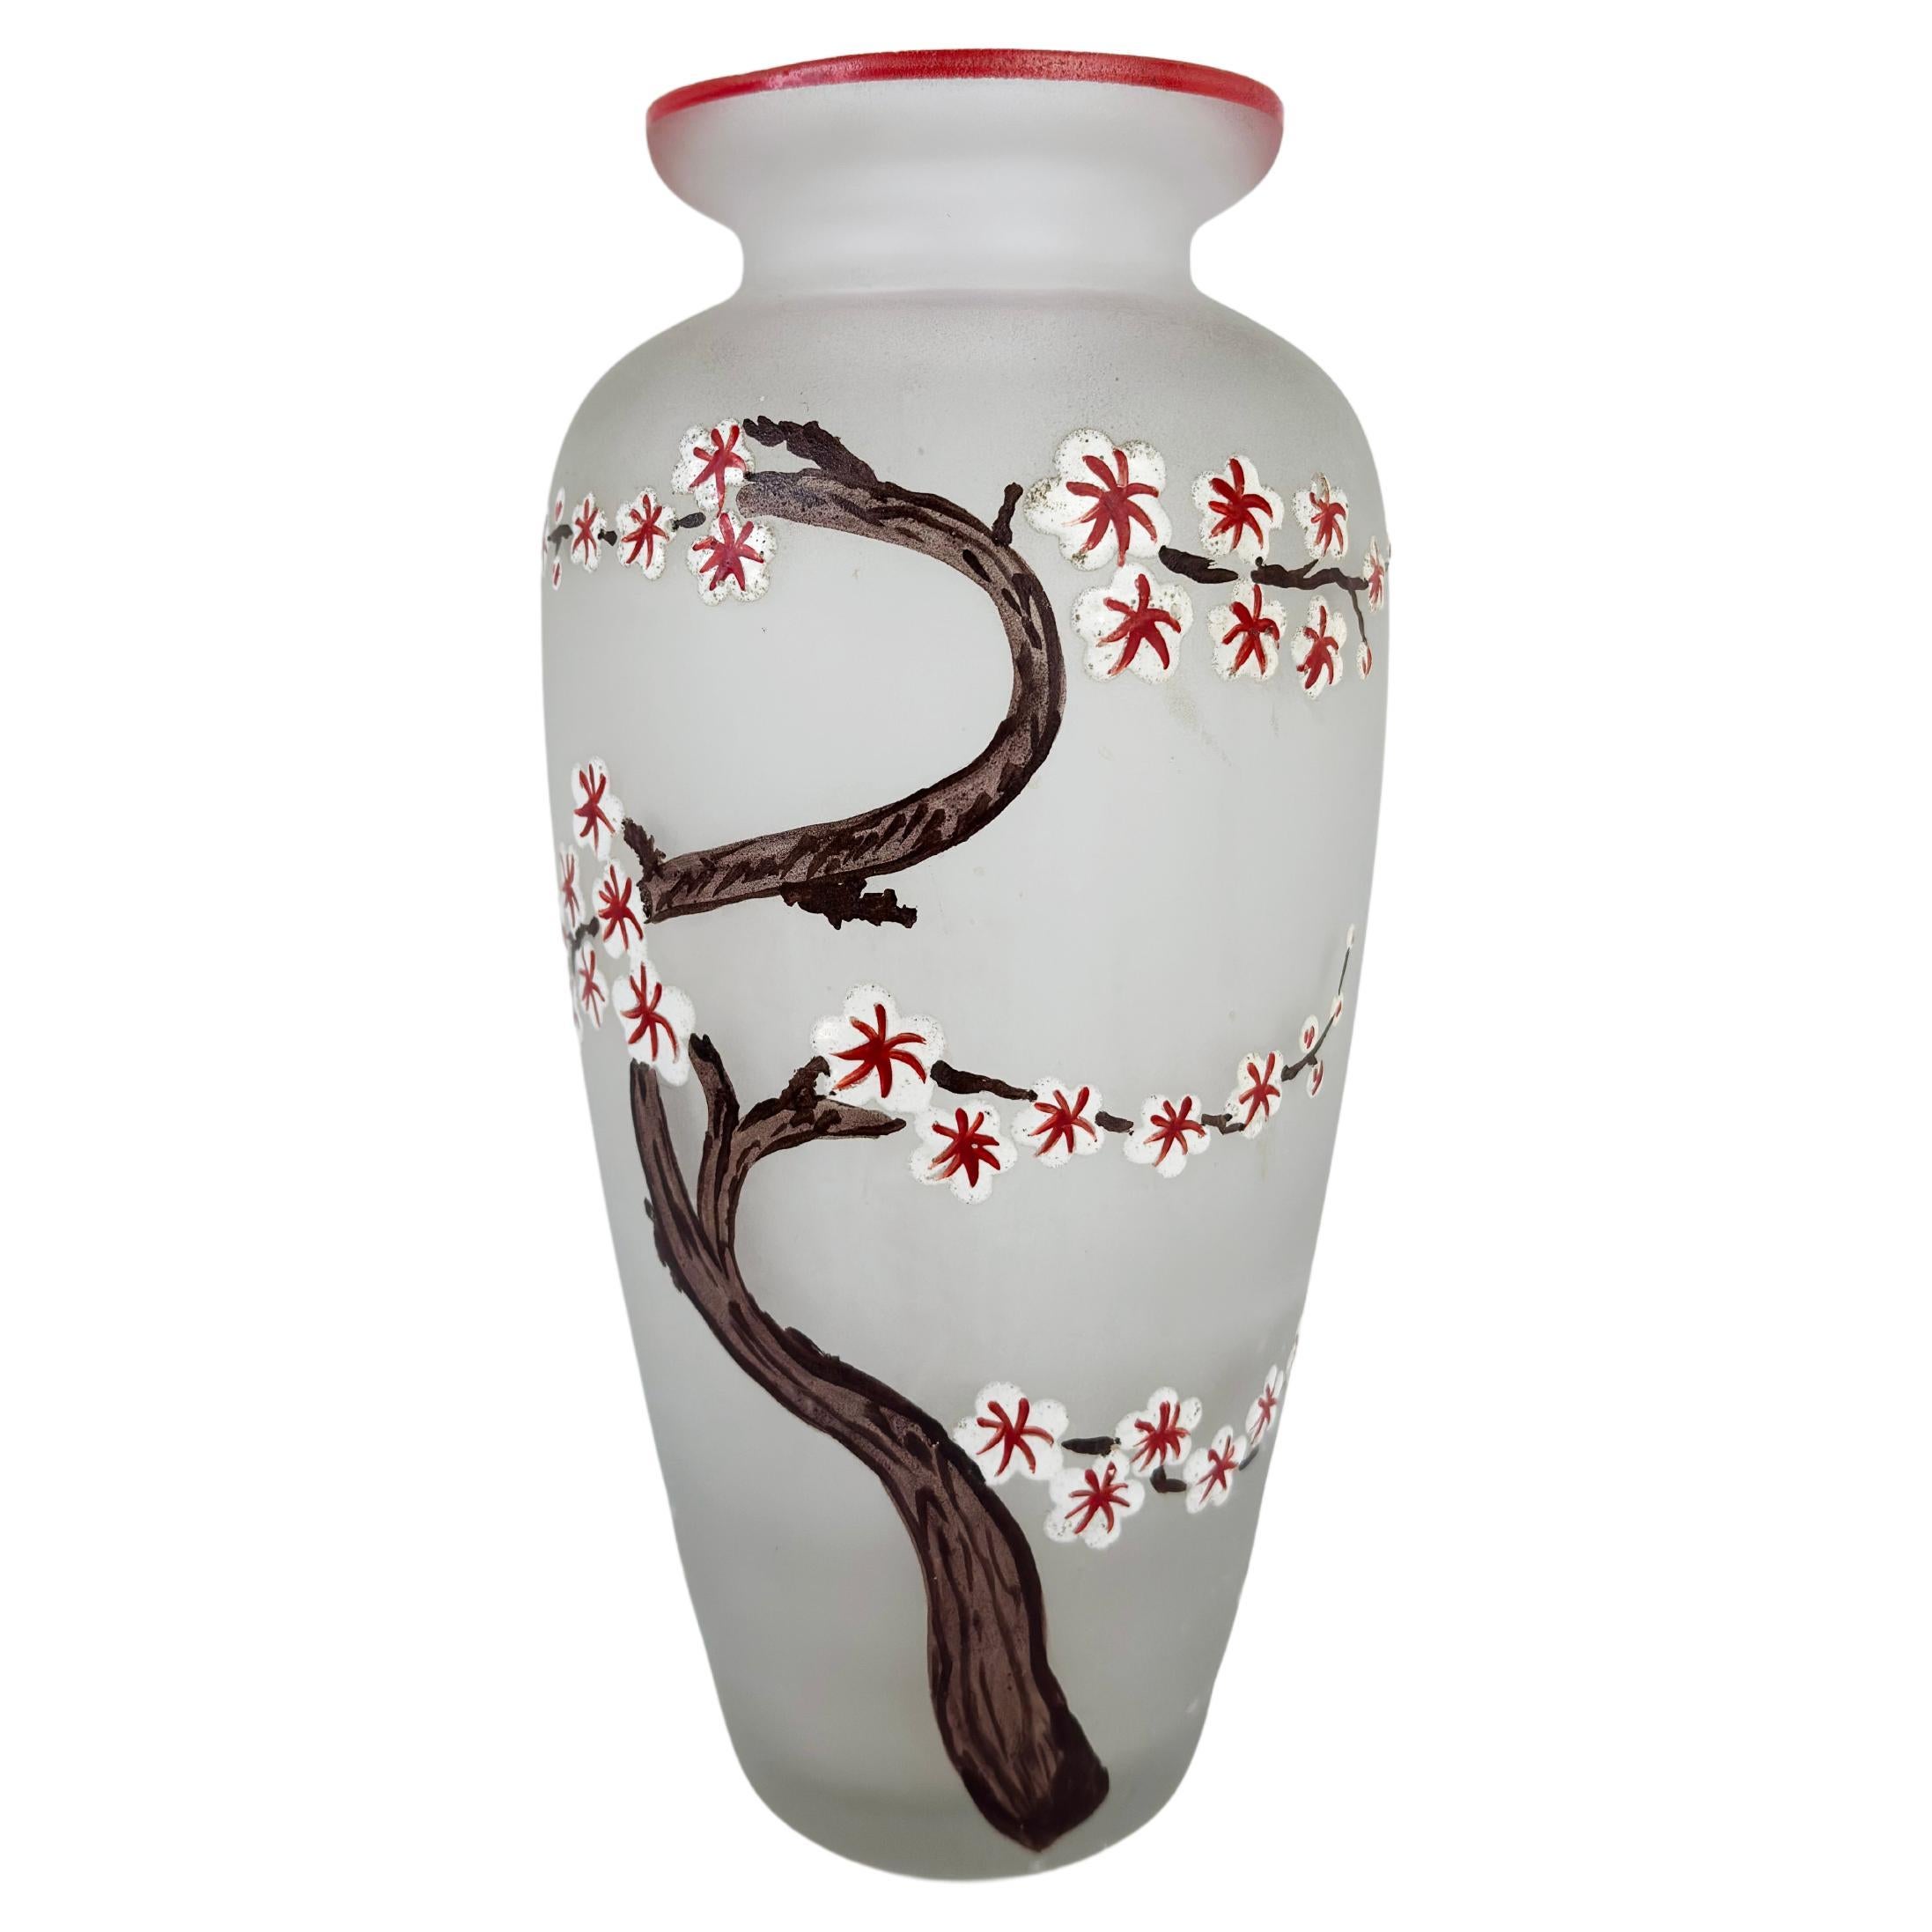 Art Nouveau Enamelled Cherry Blossom Frosted Glass Vase attributed to Legras